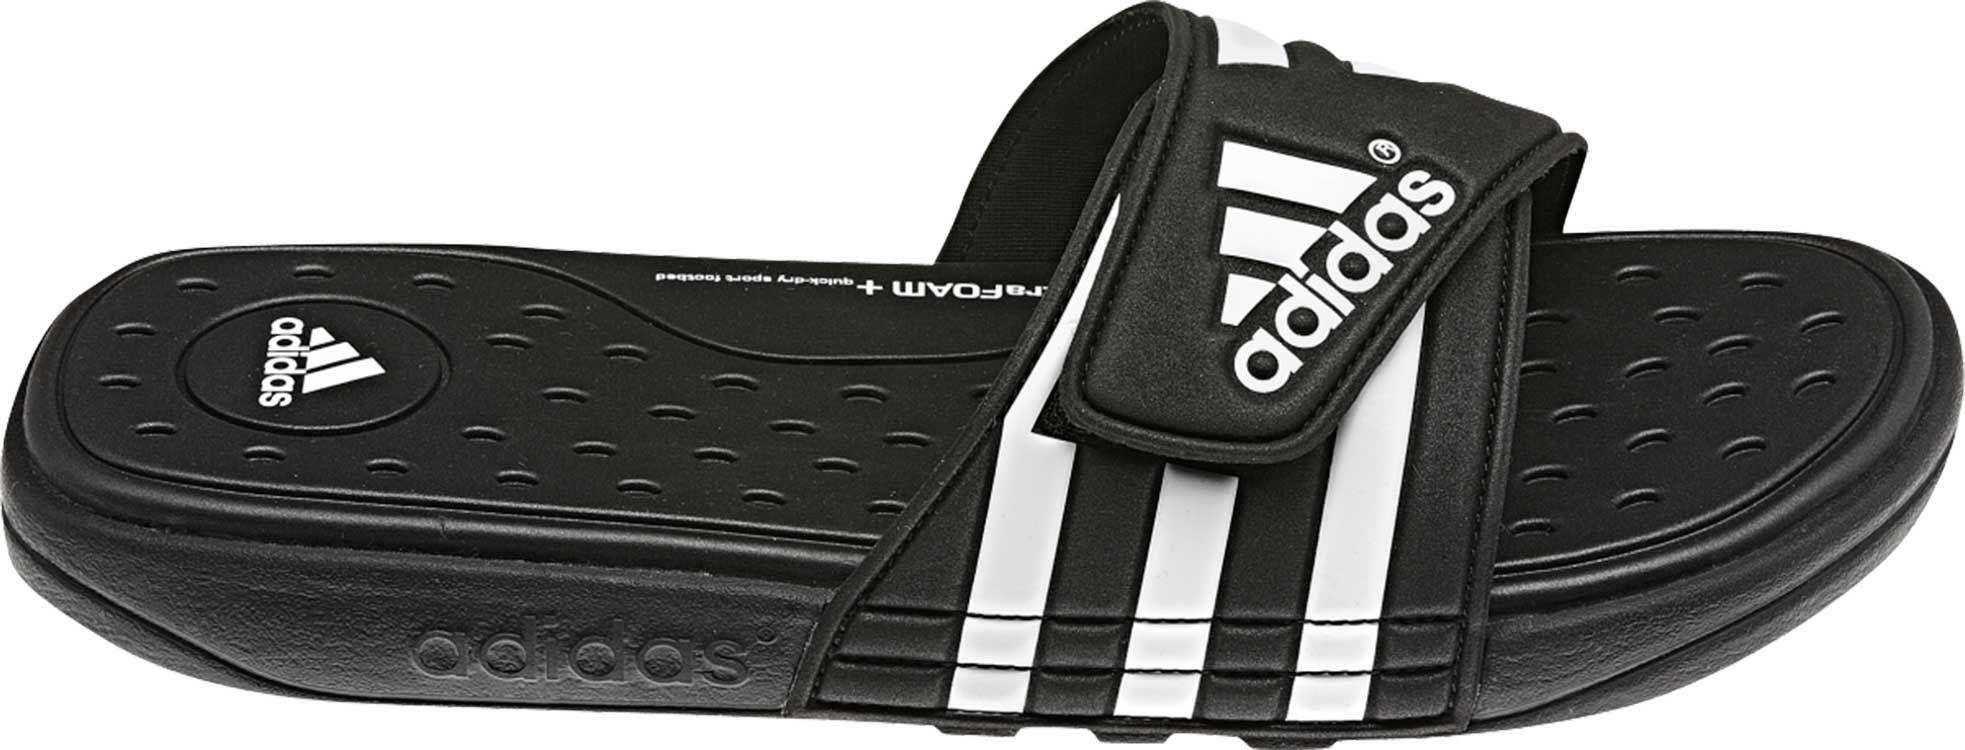 adidas Synthetic Adissage Supercloud Slides in Black/White (Black) for Men  - Lyst